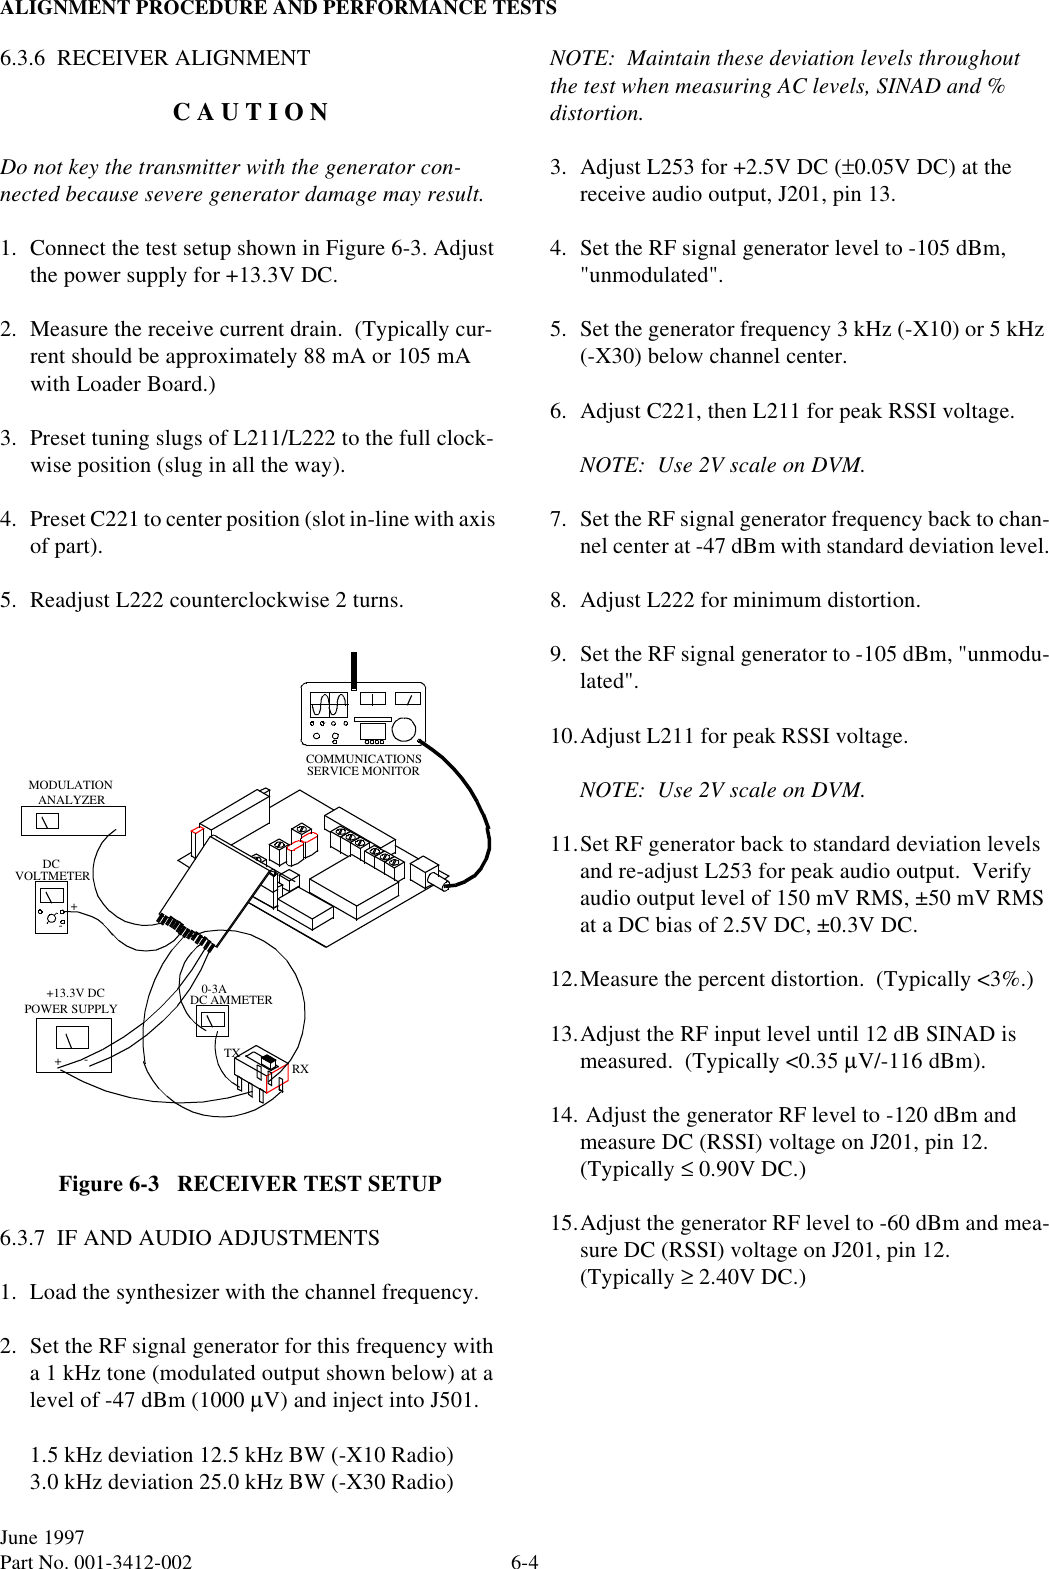 ALIGNMENT PROCEDURE AND PERFORMANCE TESTS6-4June 1997Part No. 001-3412-002 6.3.6  RECEIVER ALIGNMENTC A U T I O NDo not key the transmitter with the generator con-nected because severe generator damage may result.1. Connect the test setup shown in Figure 6-3. Adjust the power supply for +13.3V DC.2. Measure the receive current drain.  (Typically cur-rent should be approximately 88 mA or 105 mA with Loader Board.)3. Preset tuning slugs of L211/L222 to the full clock-wise position (slug in all the way).4. Preset C221 to center position (slot in-line with axis of part).5. Readjust L222 counterclockwise 2 turns.Figure 6-3   RECEIVER TEST SETUP6.3.7  IF AND AUDIO ADJUSTMENTS1. Load the synthesizer with the channel frequency.2. Set the RF signal generator for this frequency with a 1 kHz tone (modulated output shown below) at a level of -47 dBm (1000 µV) and inject into J501.1.5 kHz deviation 12.5 kHz BW (-X10 Radio)3.0 kHz deviation 25.0 kHz BW (-X30 Radio)NOTE:  Maintain these deviation levels throughout the test when measuring AC levels, SINAD and % distortion.3. Adjust L253 for +2.5V DC (±0.05V DC) at the receive audio output, J201, pin 13.4. Set the RF signal generator level to -105 dBm, &quot;unmodulated&quot;.5. Set the generator frequency 3 kHz (-X10) or 5 kHz (-X30) below channel center.6. Adjust C221, then L211 for peak RSSI voltage.NOTE:  Use 2V scale on DVM.7. Set the RF signal generator frequency back to chan-nel center at -47 dBm with standard deviation level.8. Adjust L222 for minimum distortion.9. Set the RF signal generator to -105 dBm, &quot;unmodu-lated&quot;.10.Adjust L211 for peak RSSI voltage.NOTE:  Use 2V scale on DVM.11.Set RF generator back to standard deviation levels and re-adjust L253 for peak audio output.  Verify audio output level of 150 mV RMS, ±50 mV RMS at a DC bias of 2.5V DC, ±0.3V DC.12.Measure the percent distortion.  (Typically &lt;3%.)13.Adjust the RF input level until 12 dB SINAD is measured.  (Typically &lt;0.35 µV/-116 dBm).14. Adjust the generator RF level to -120 dBm and measure DC (RSSI) voltage on J201, pin 12. (Typically ≤ 0.90V DC.)15.Adjust the generator RF level to -60 dBm and mea-sure DC (RSSI) voltage on J201, pin 12.  (Typically ≥ 2.40V DC.)POWER SUPPLYTXRXVOLTMETERDC+-COMMUNICATIONSSERVICE MONITORDC AMMETER+-ANALYZERMODULATION+13.3V DC 0-3A